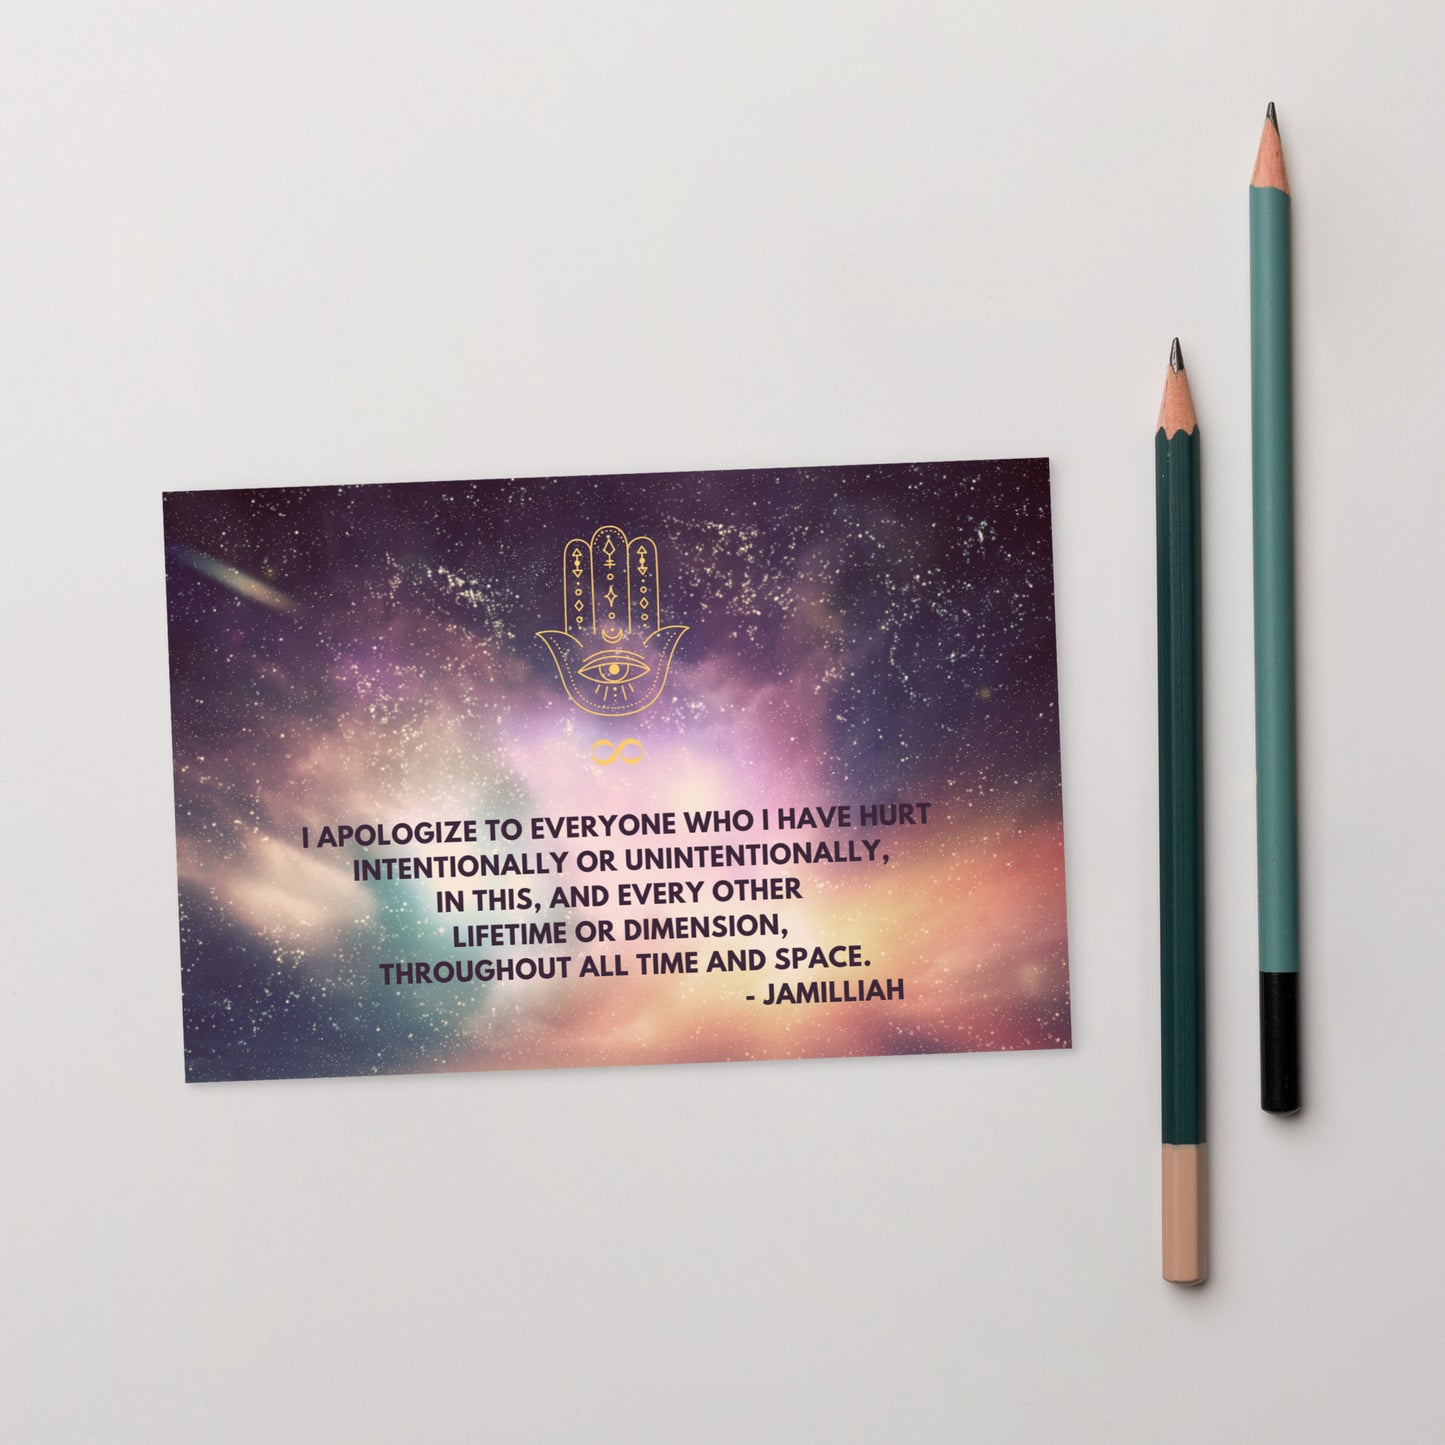 4x6, glossy, cardboard, postcards. Original hamsa hand/infinity symbol brand logo on top of colorful, starry cosmos design. Wise quote mantra/motto/saying/slogan. "I Apologize To Everyone Who I Have Hurt Intentionally Or Unintentionally, In This, And Every Other Lifetime Or Dimension, Throughout All Time And Space." - Jamilliah - Shown with pencils. JAMILLIAH'S WISDOM IS TIMELESS SHOP - wisdomistimeless.com.